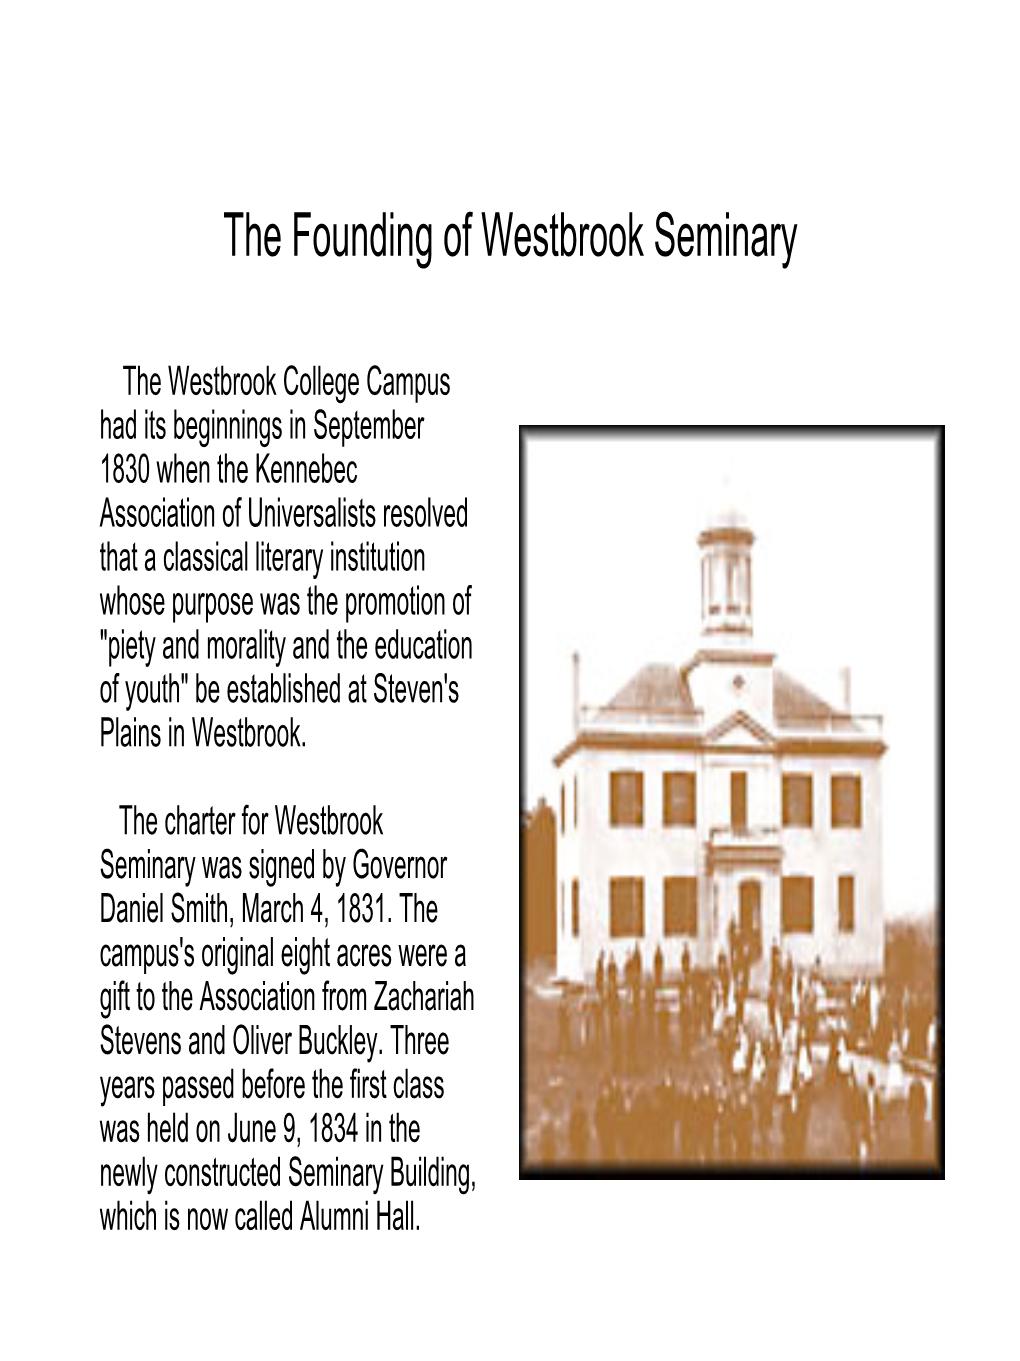 The Founding of Westbrook Seminary